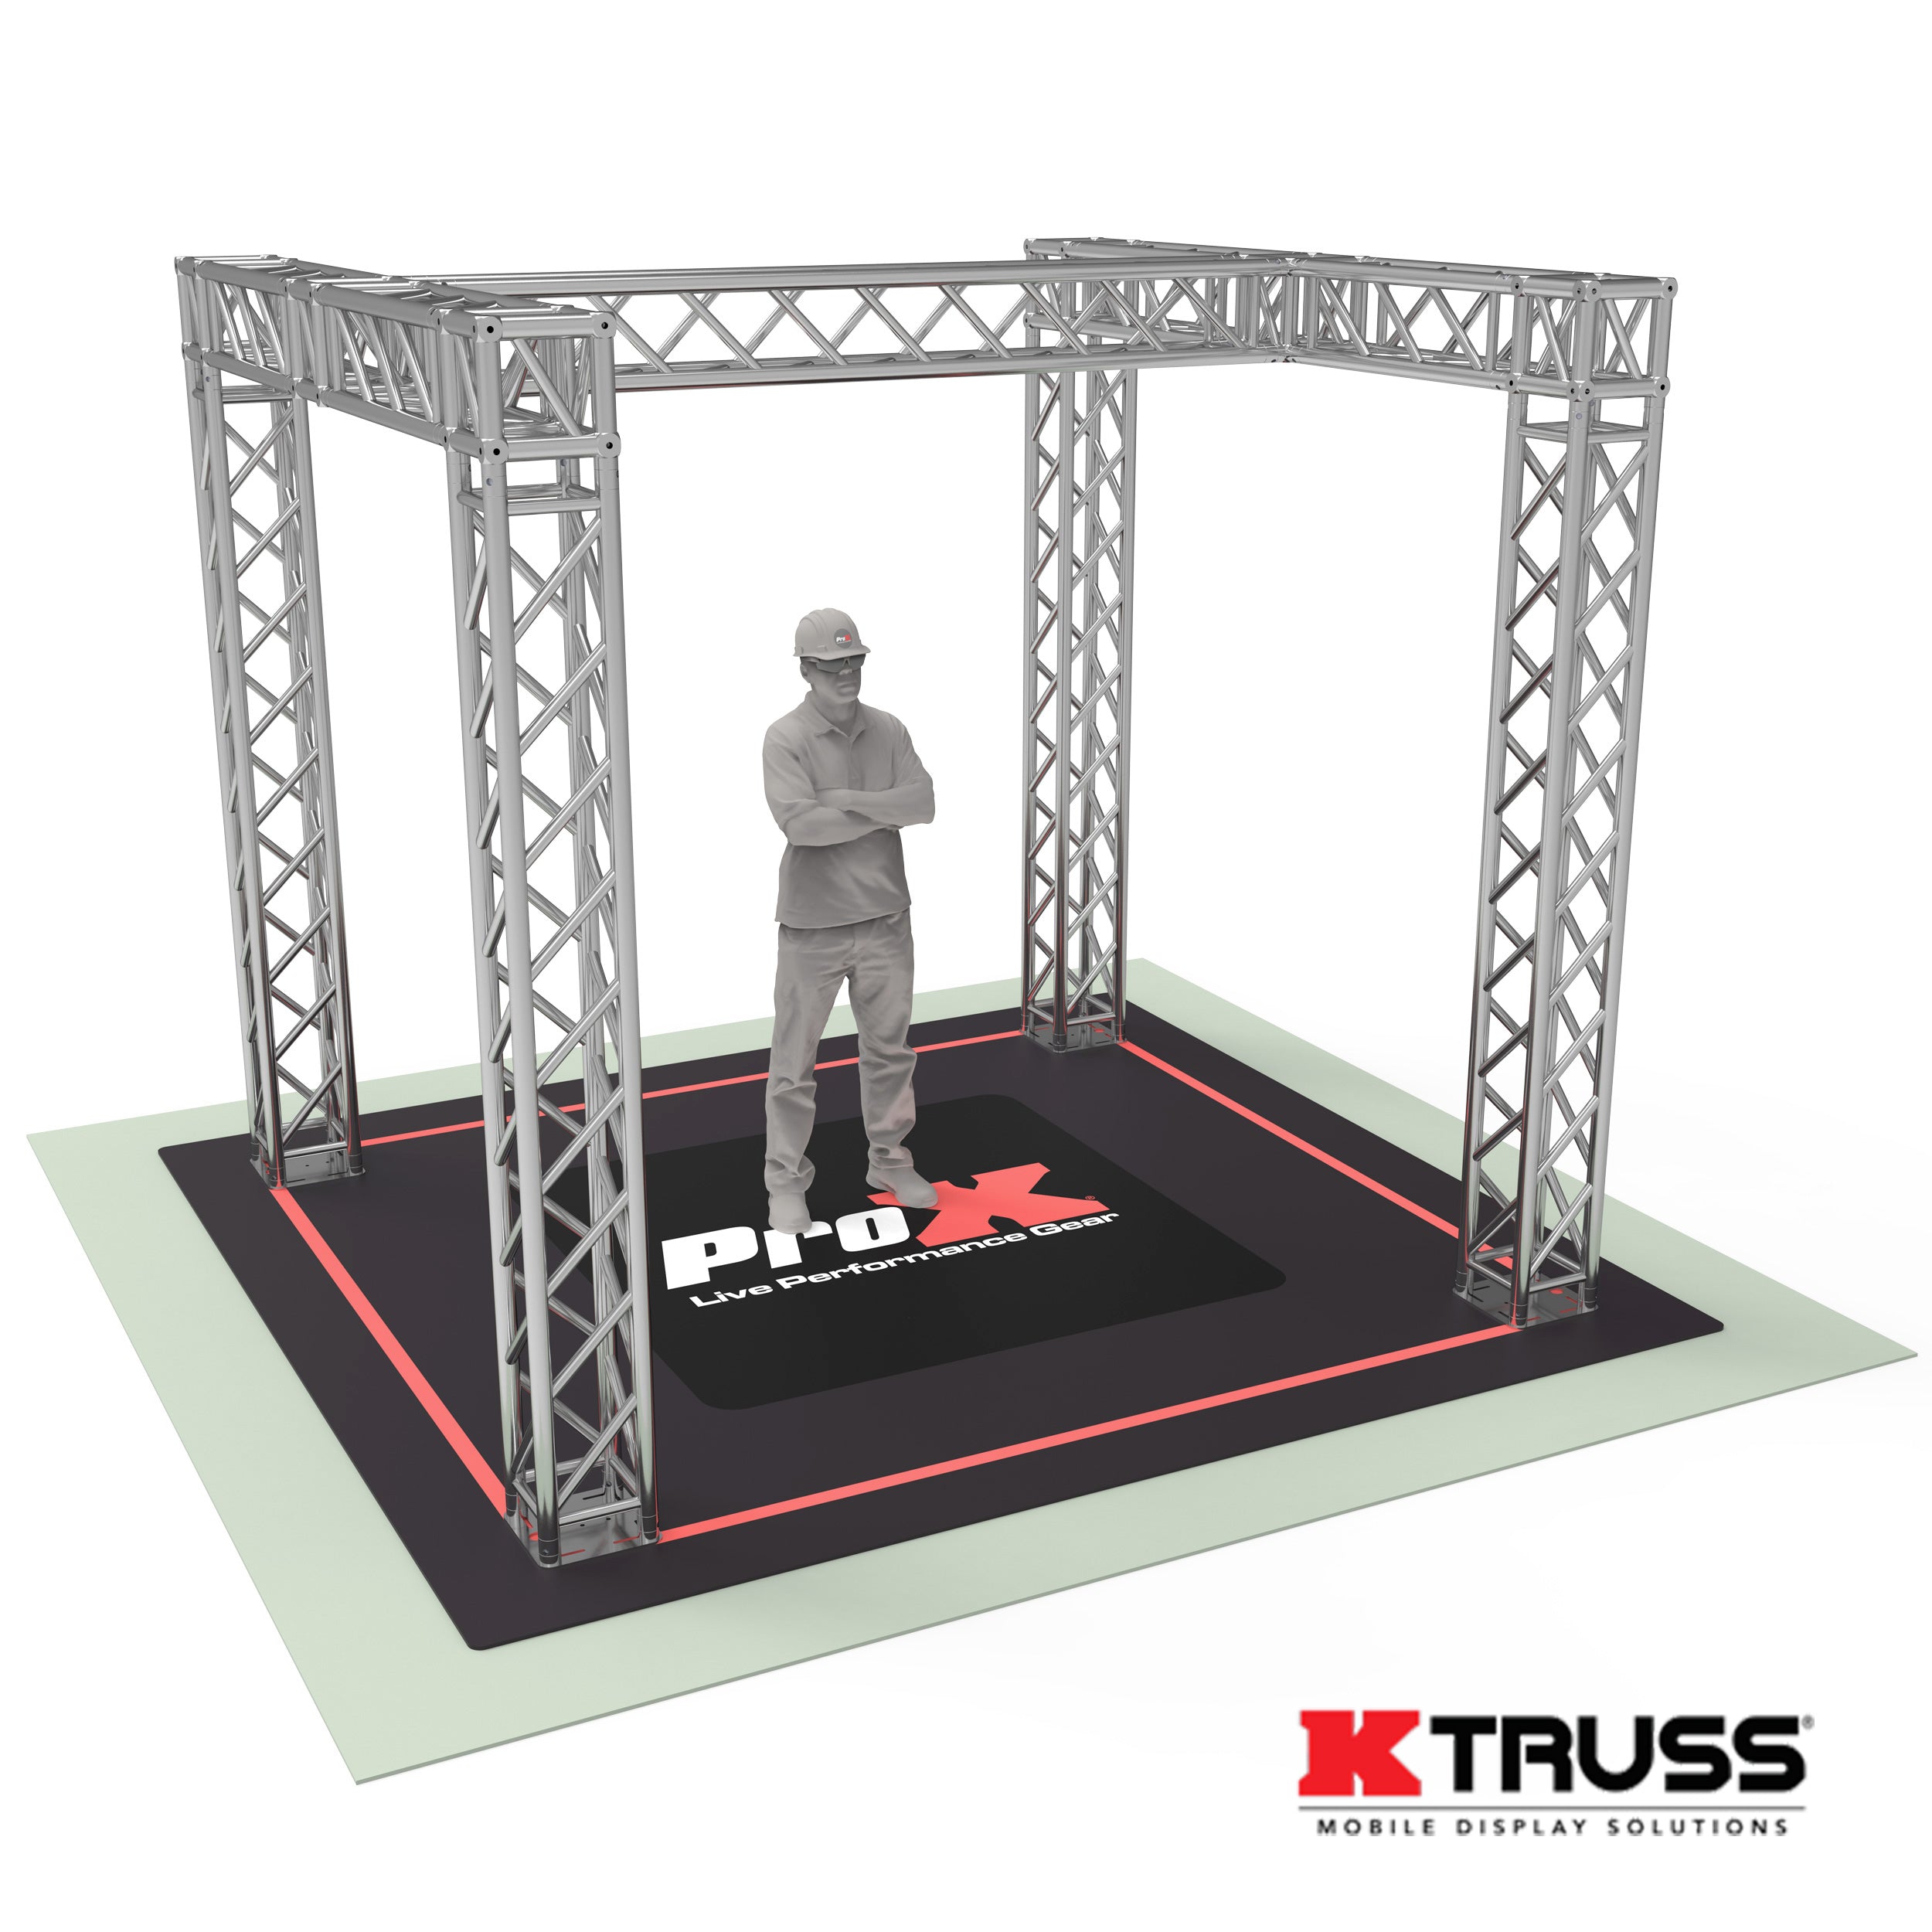 Pro X Tradeshow Booth 10.11 W X 9.42 L X 9.20 FT H with H Shape Design in center - 2mm Heavy Duty Truss XTP-E1099H